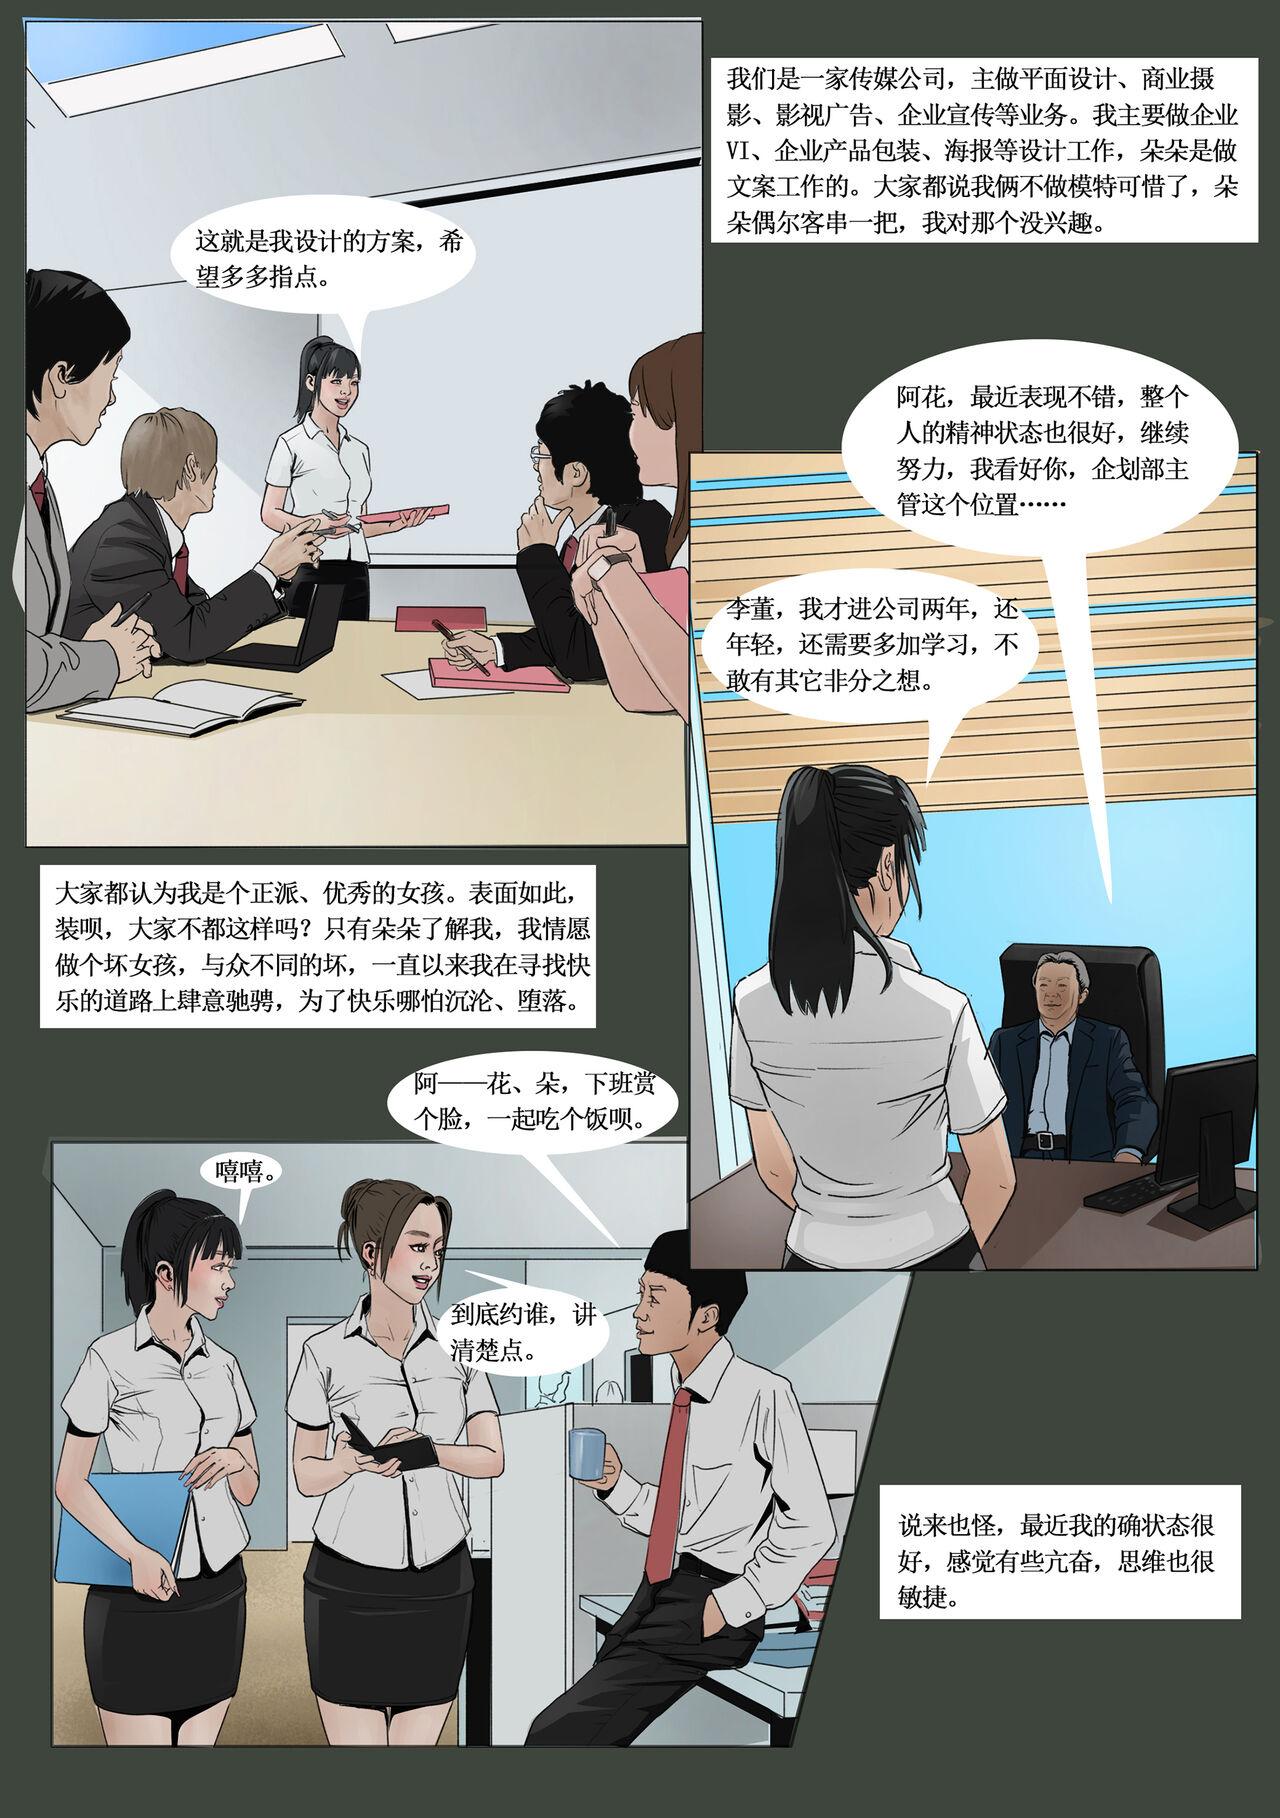 Francaise 枫语Foryou《阿花与阿朵》第二话 A hua and A duo 2 Chinese No Condom - Page 10